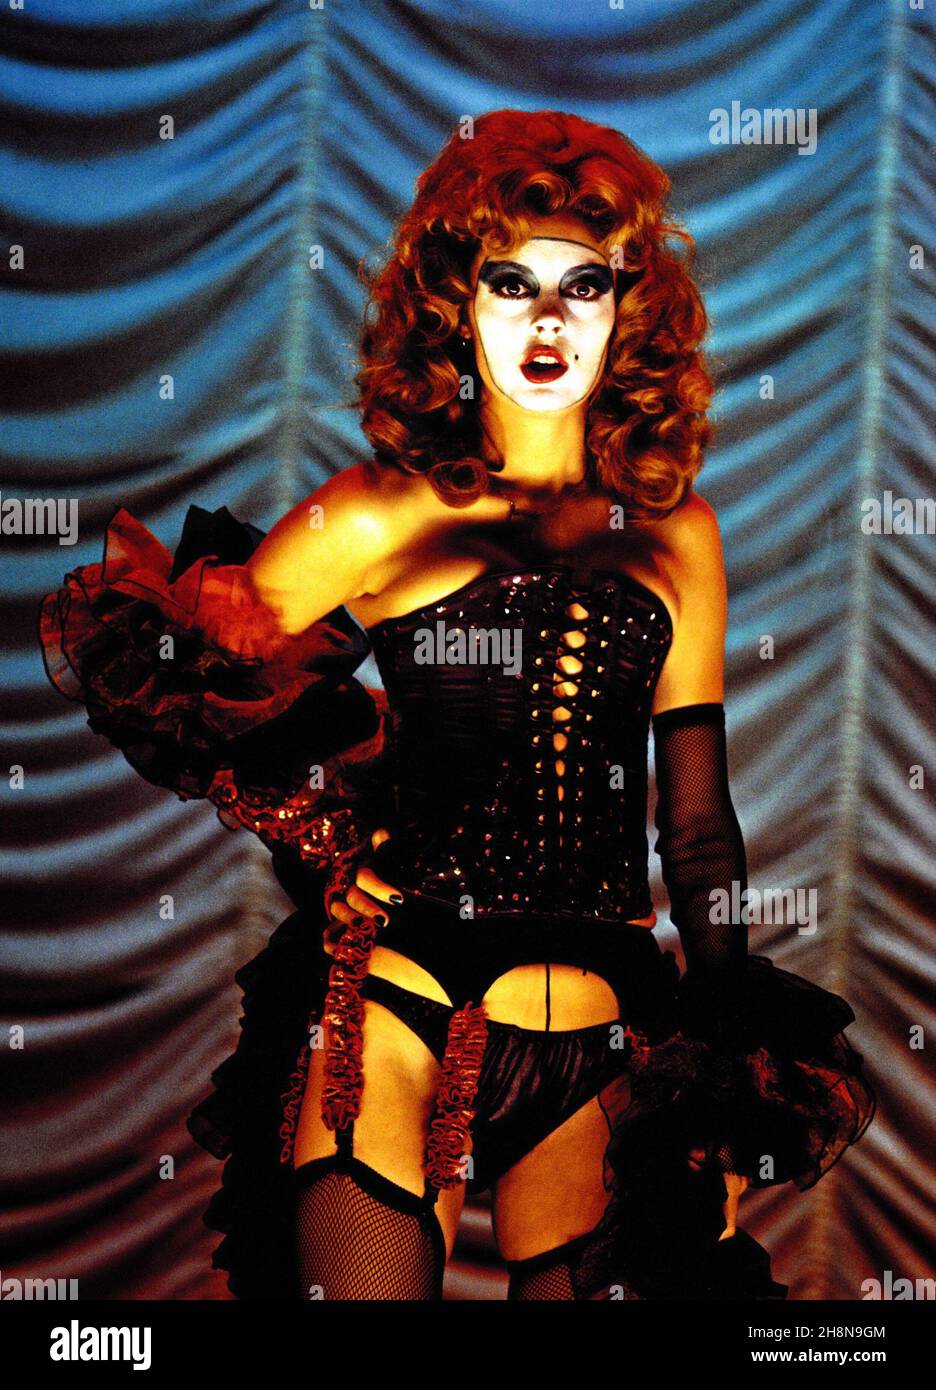 SUSAN SARANDON in THE ROCKY HORROR PICTURE SHOW (1975), directed by JIM SHARMAN. Credit: 20TH CENTURY FOX / Album Stock Photo